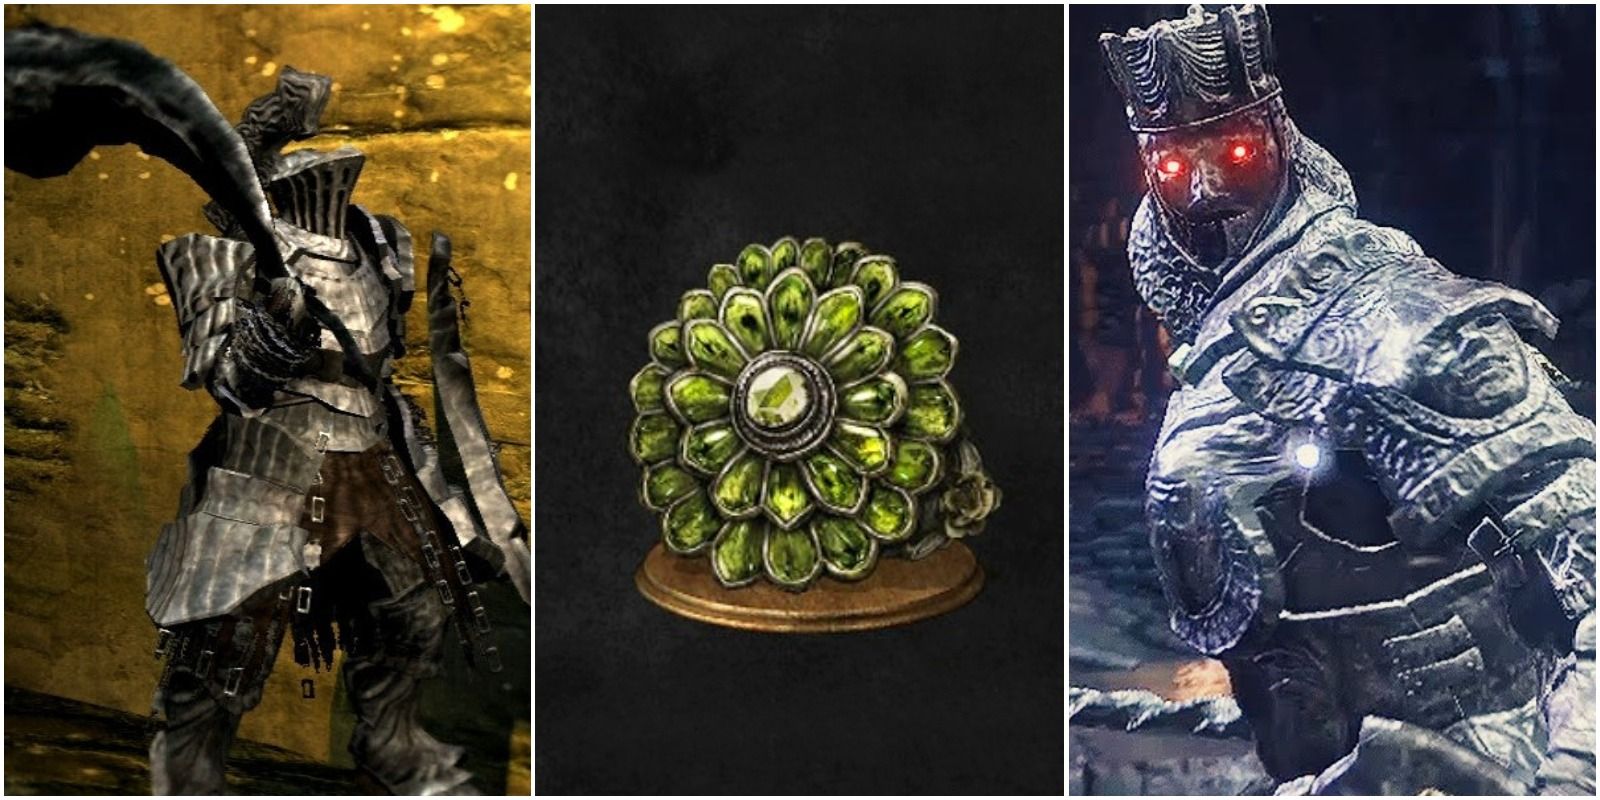 havel the rock, chloranthy ring, and champion gundyr.